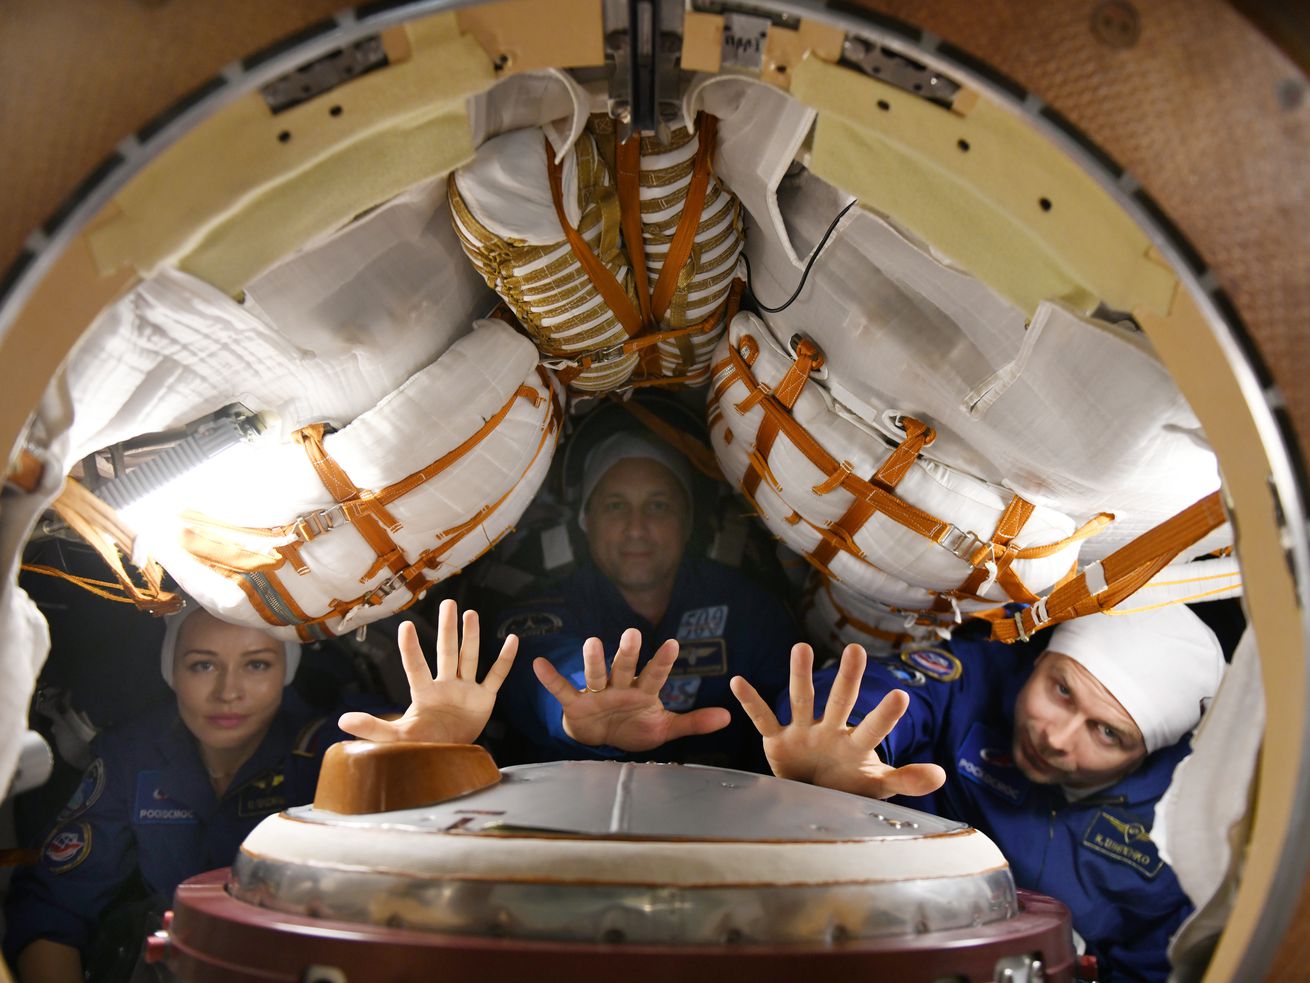 Russian cosmonauts are shown reaching toward the camera, framed in a circular doorway, with equipment surrounding them.